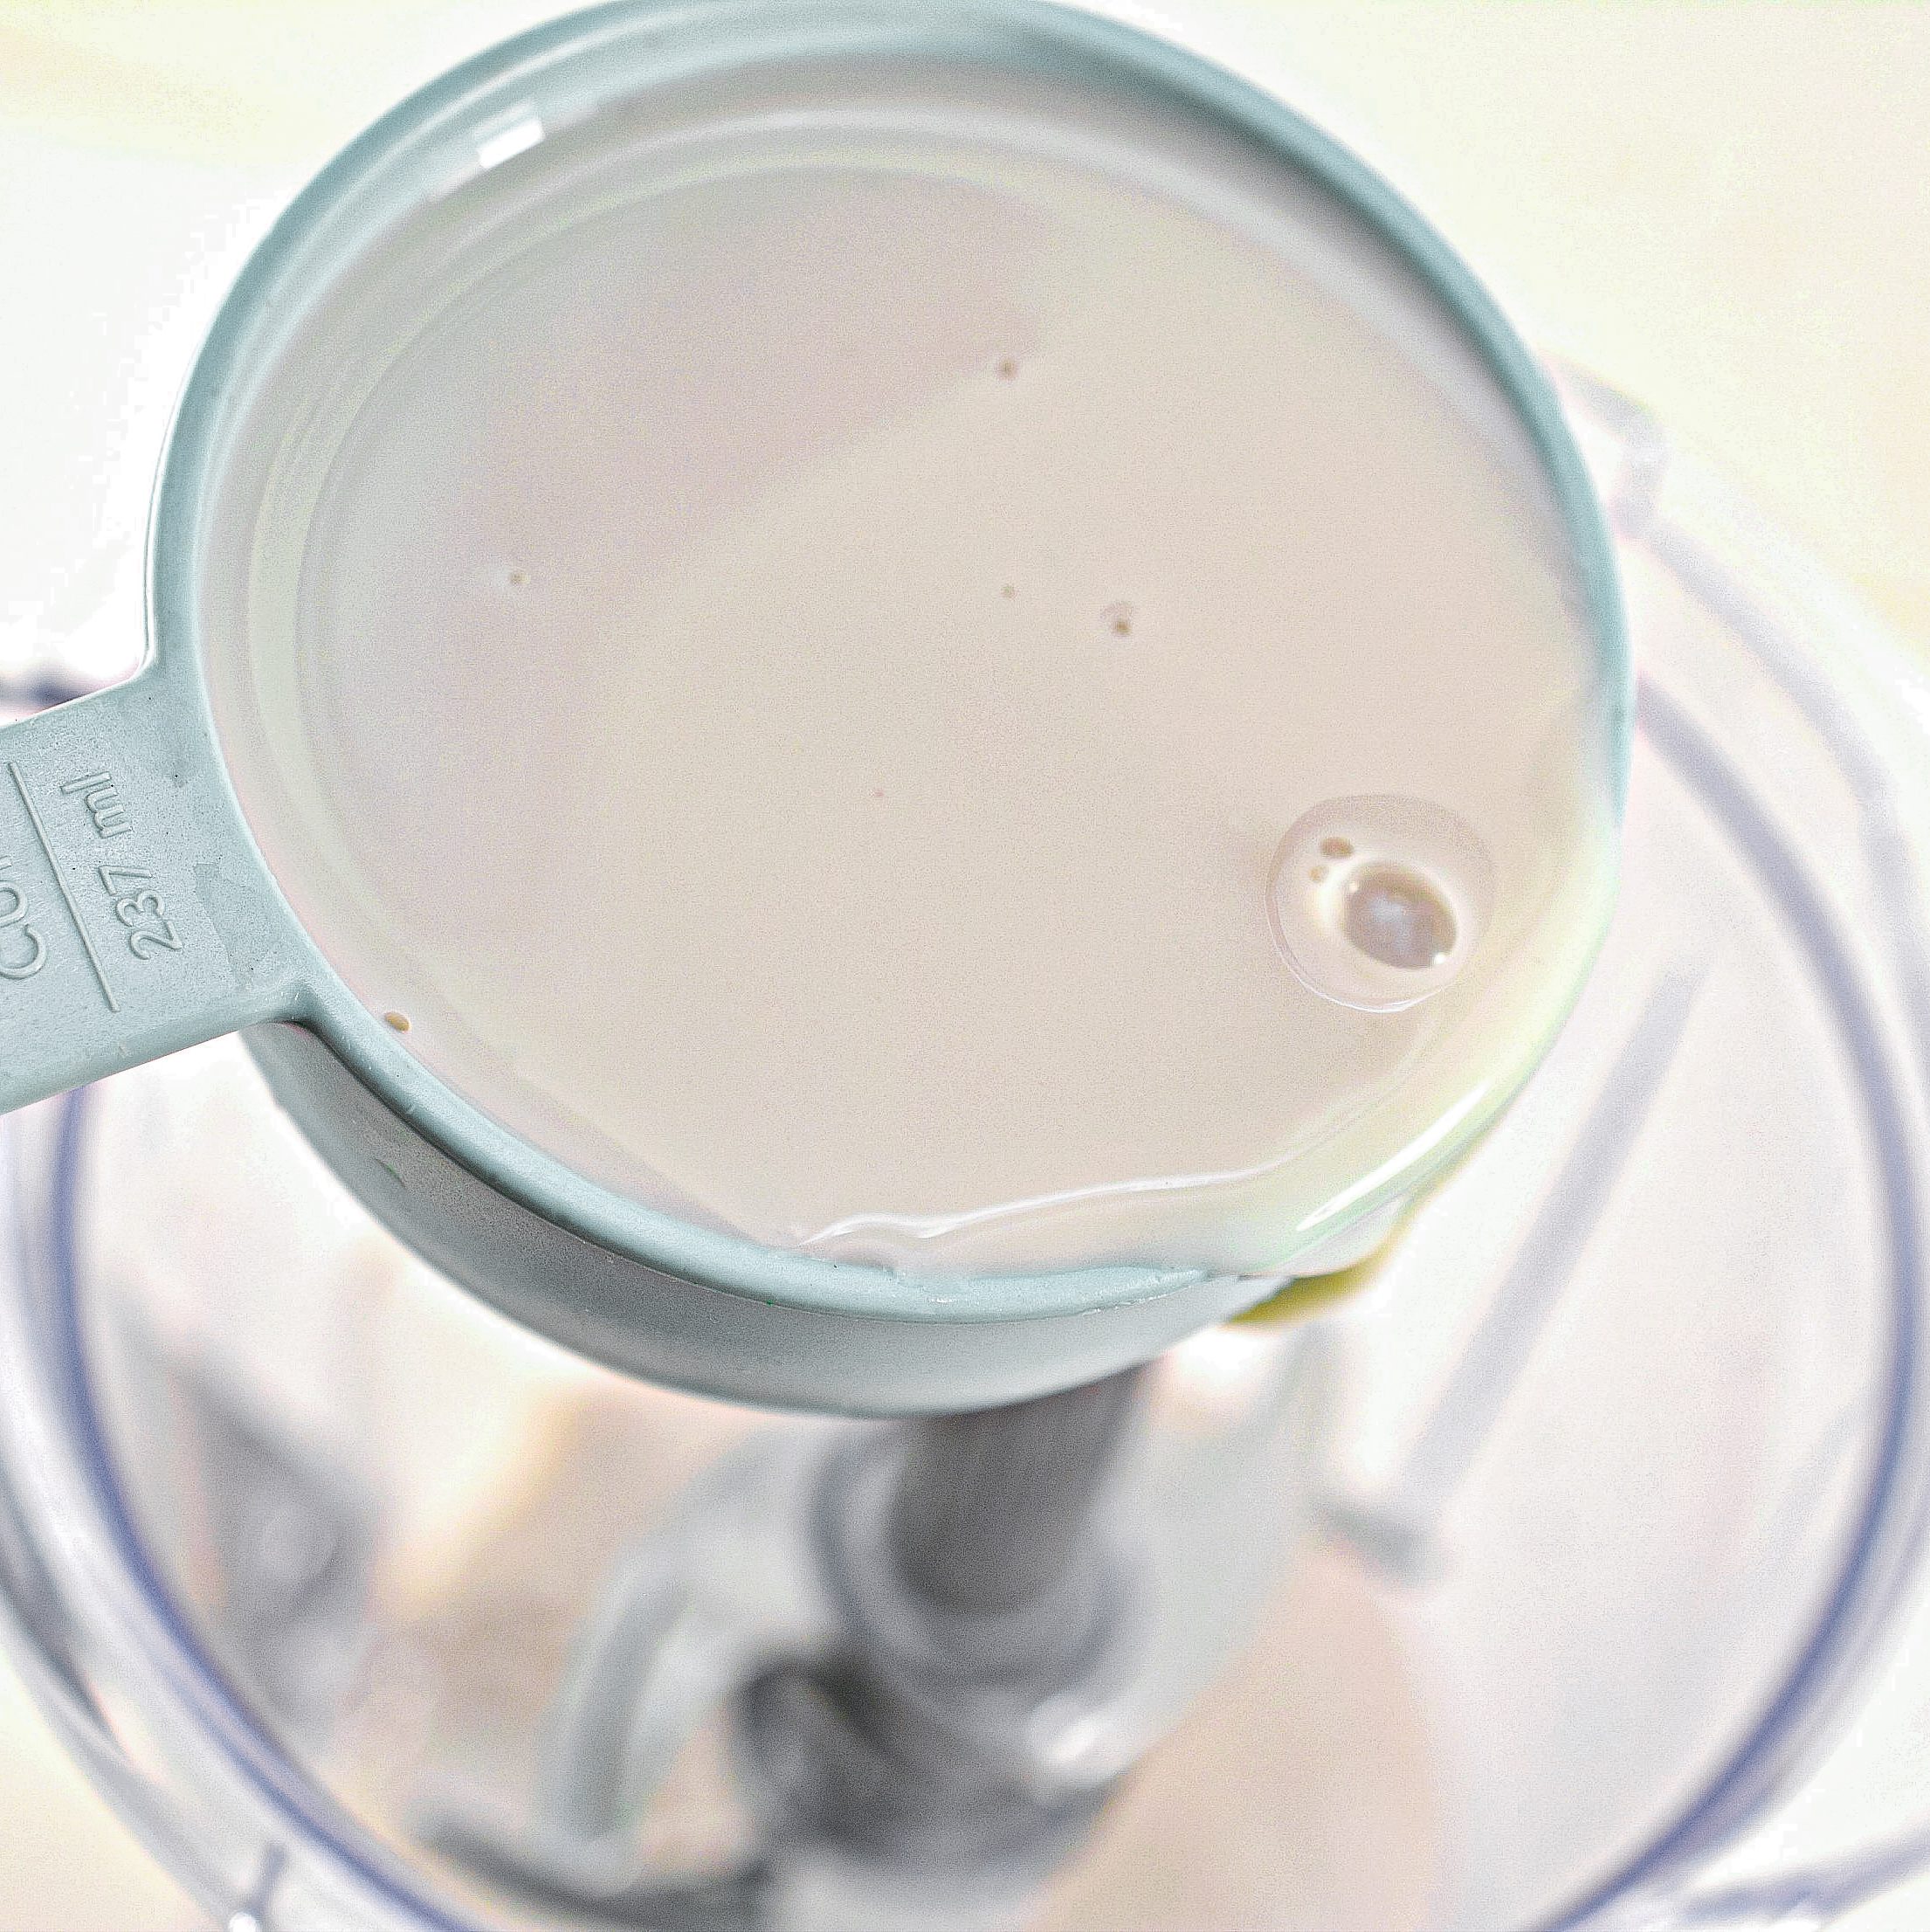 Place 2 cups of unsweetened almond milk into a blender or food processor.